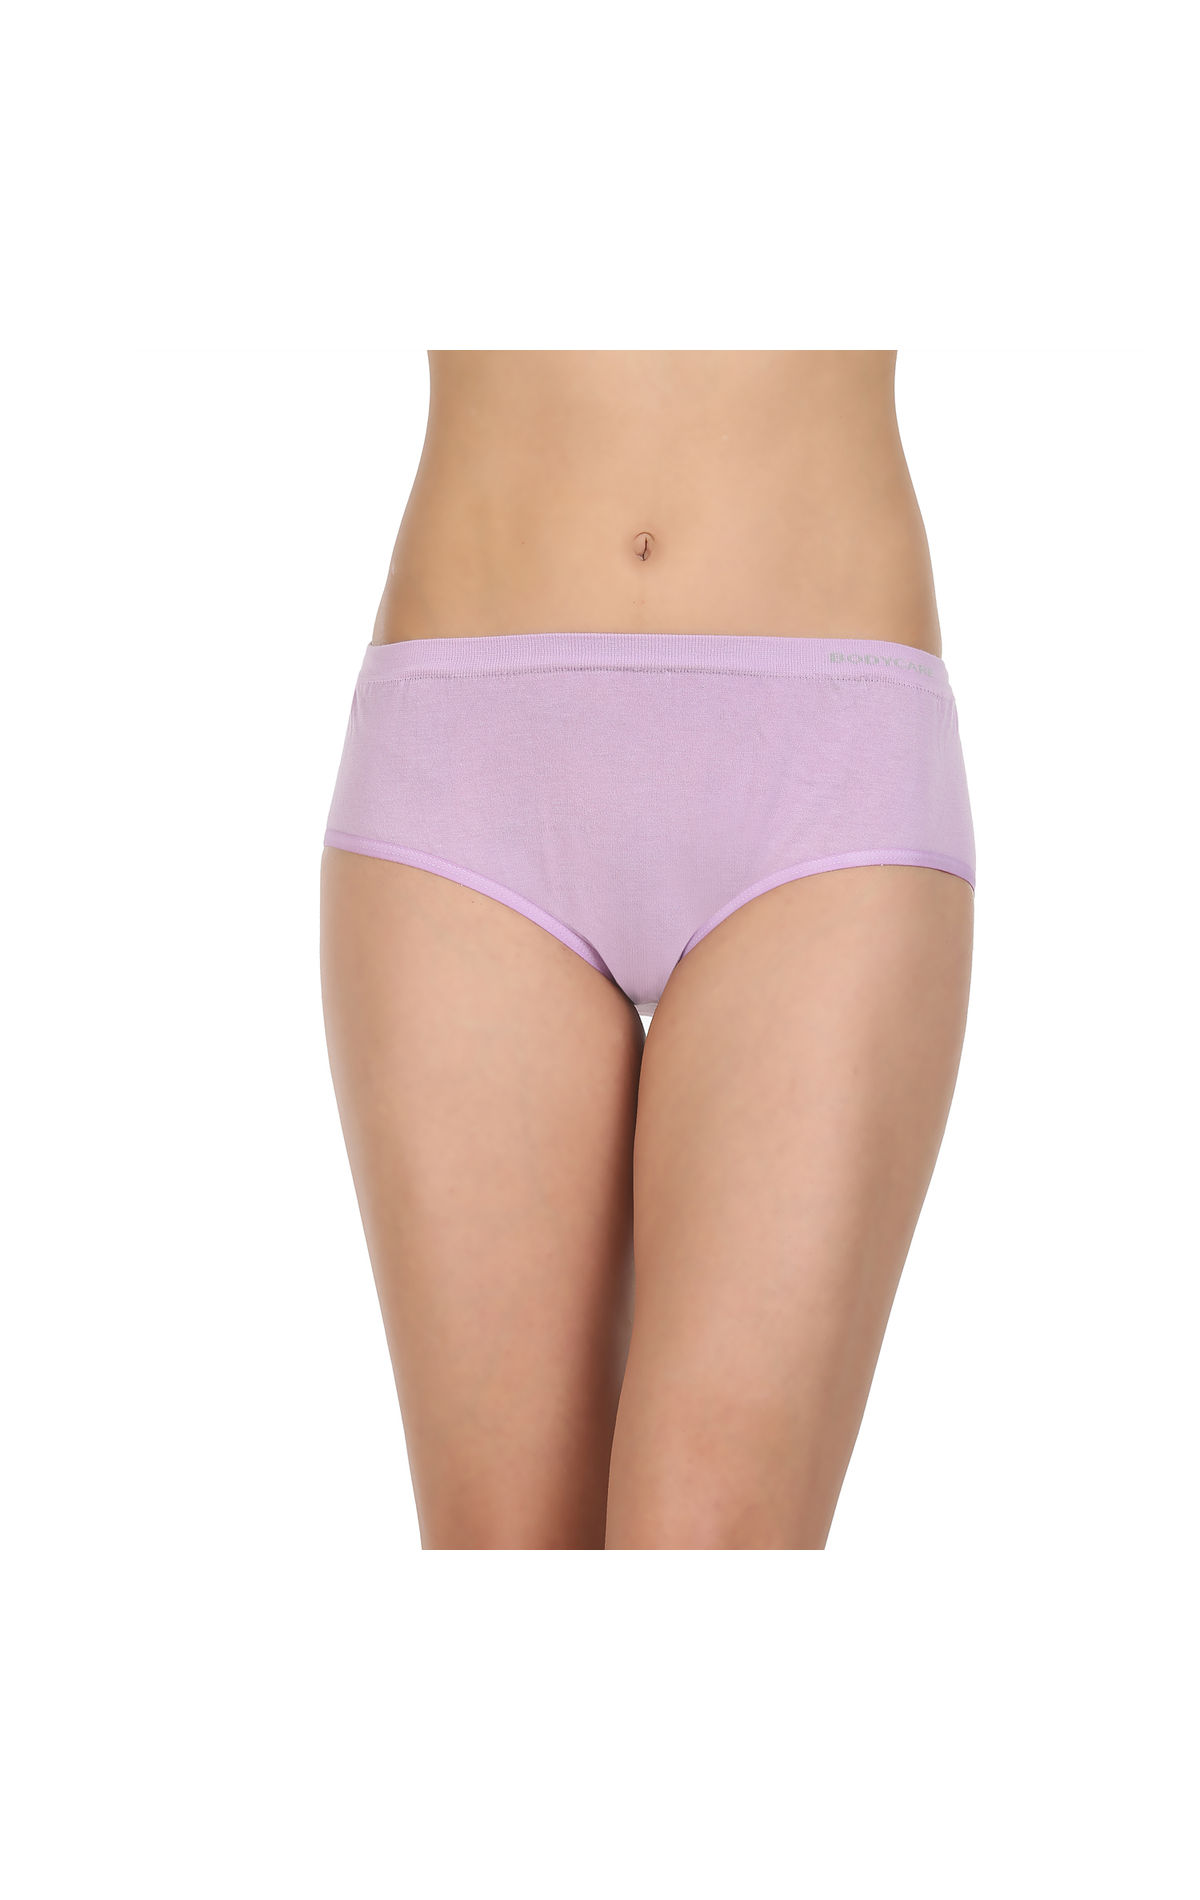 Pack Of 3 Cotton Briefs In Assorted Colors-s-10c